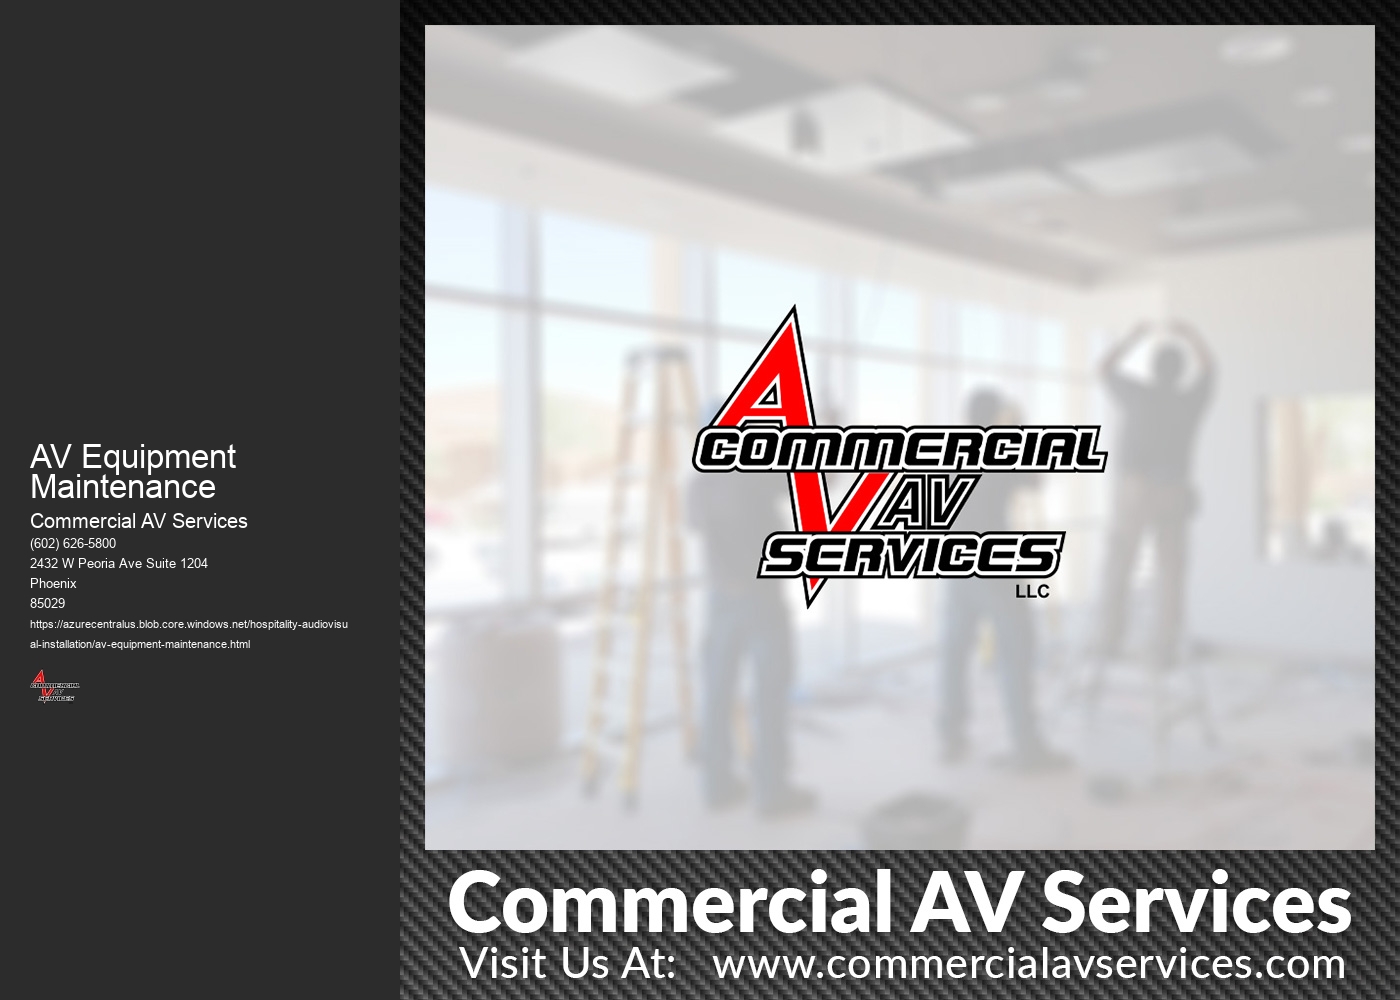 What are the best practices for storing AV equipment when not in use?